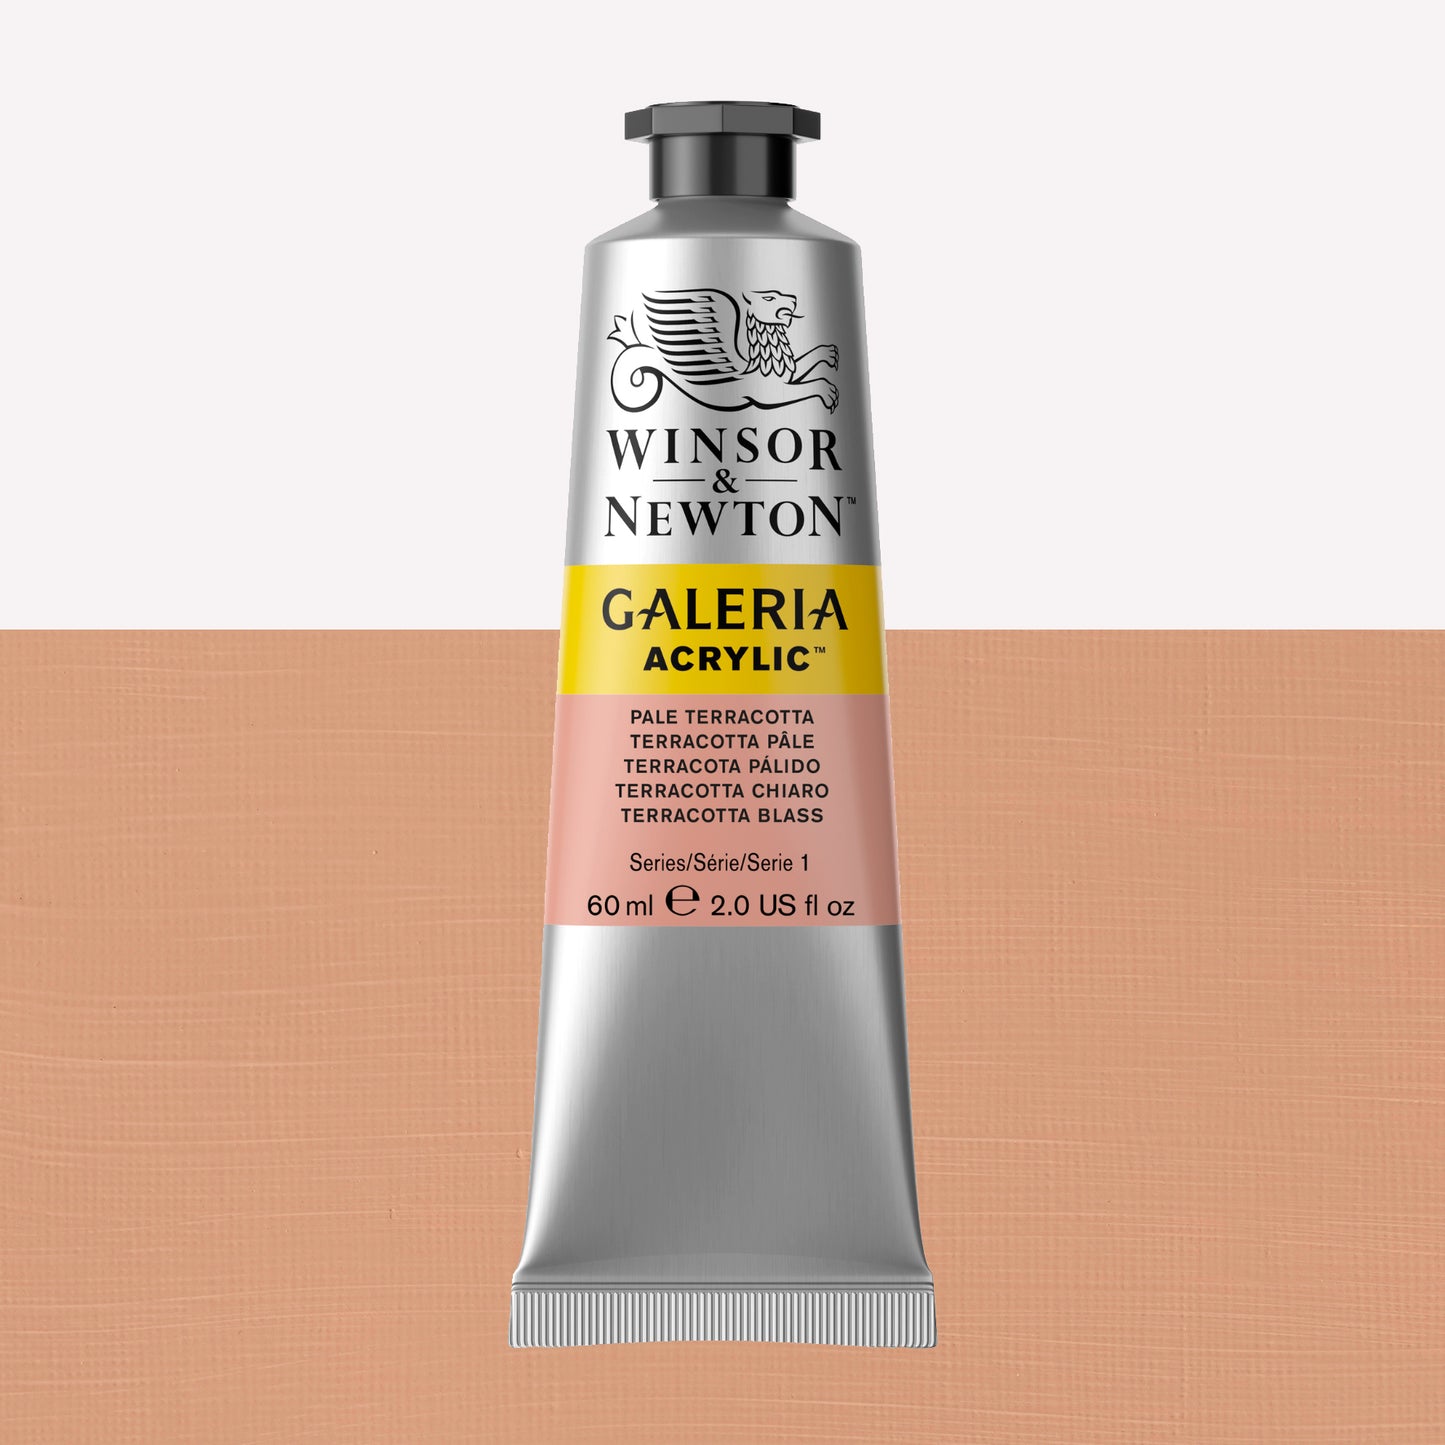 A 60ml tube of vibrant Galeria Acrylic paint in the shade Pale Terracotta. This professional-quality paint is packaged in a silver tube with a black lid. Made by Winsor and Newton.